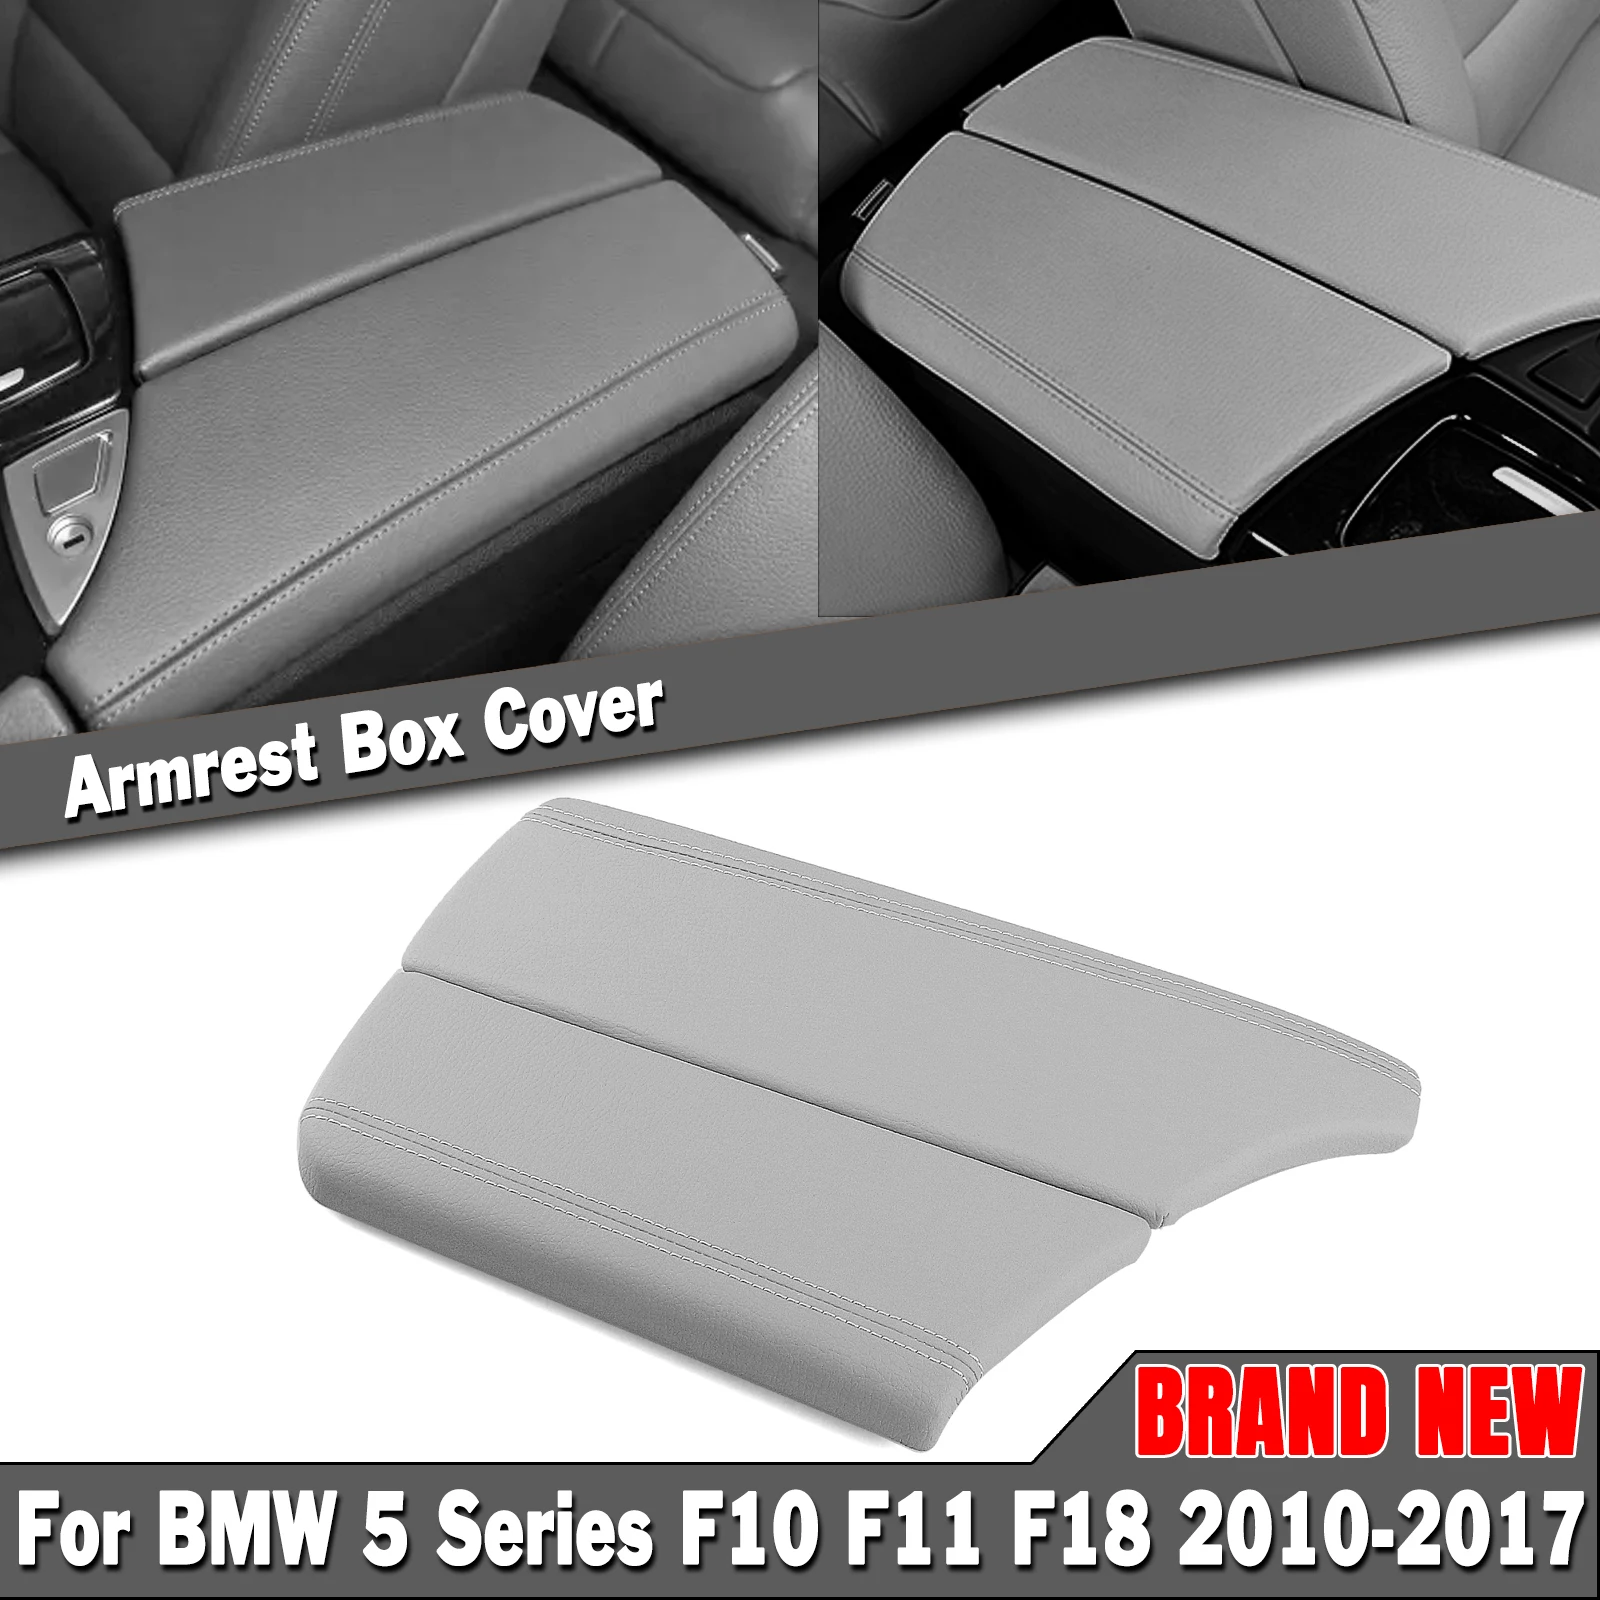 

For BMW 5 Series F10 F11 F18 2010 2011 2012 2013 2014 2015 2016 2017 Leather Center Console Armrest Control Arm Rest Panel Cover